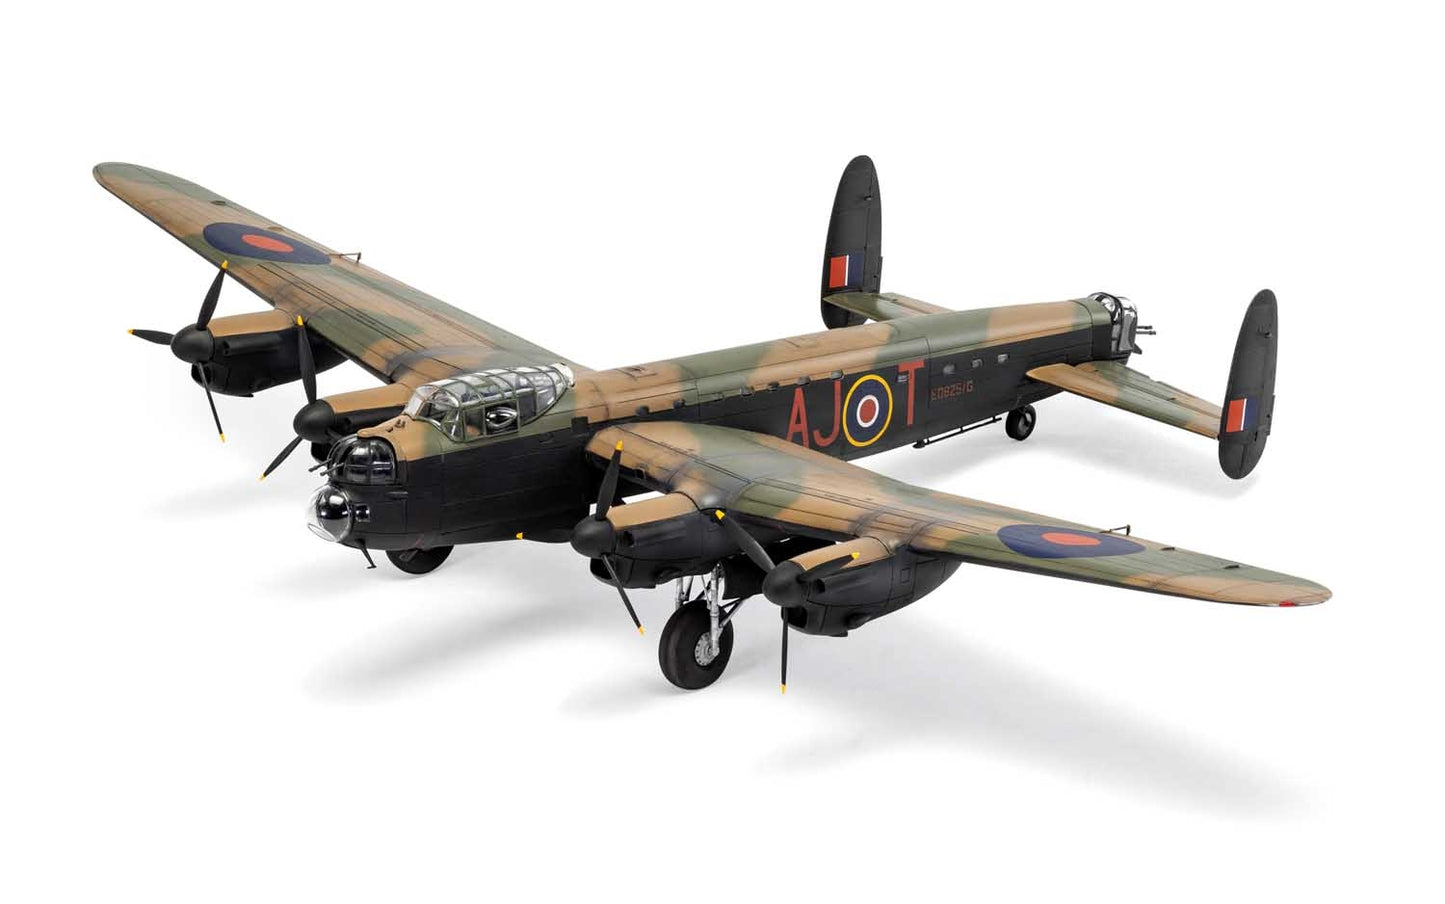 Avro Lancaster B.III (Special) The Dambusters - AIRFIX 1/72